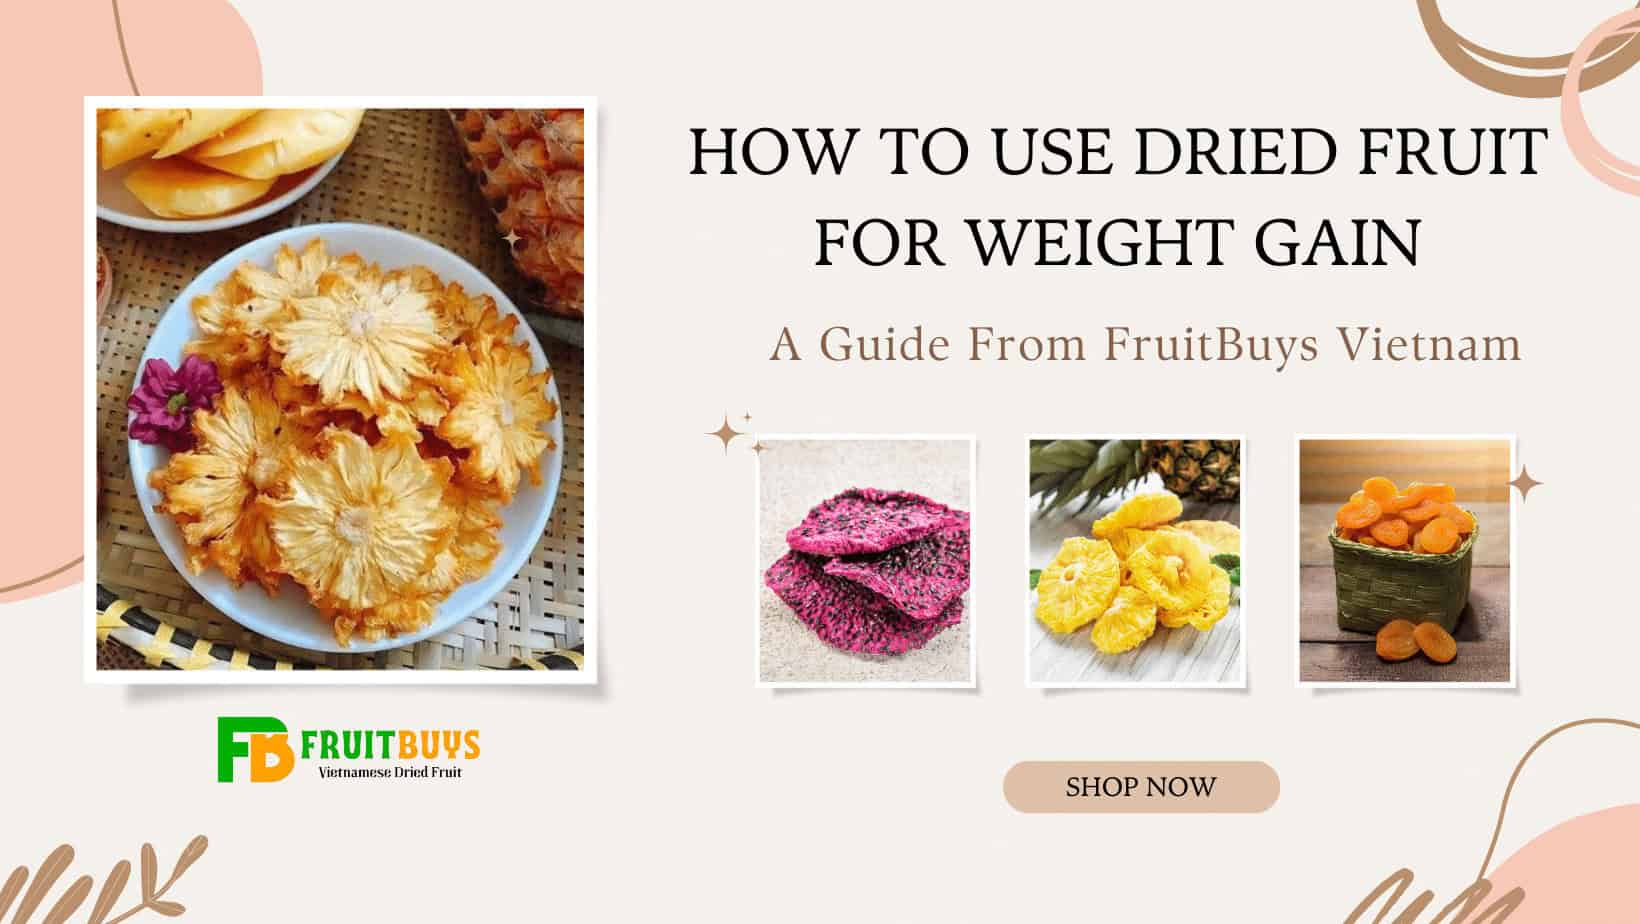 FruitBuys Vietnam  How To Use Dried Fruit For Weight Gain_ A Guide From FruitBuys Vietnam